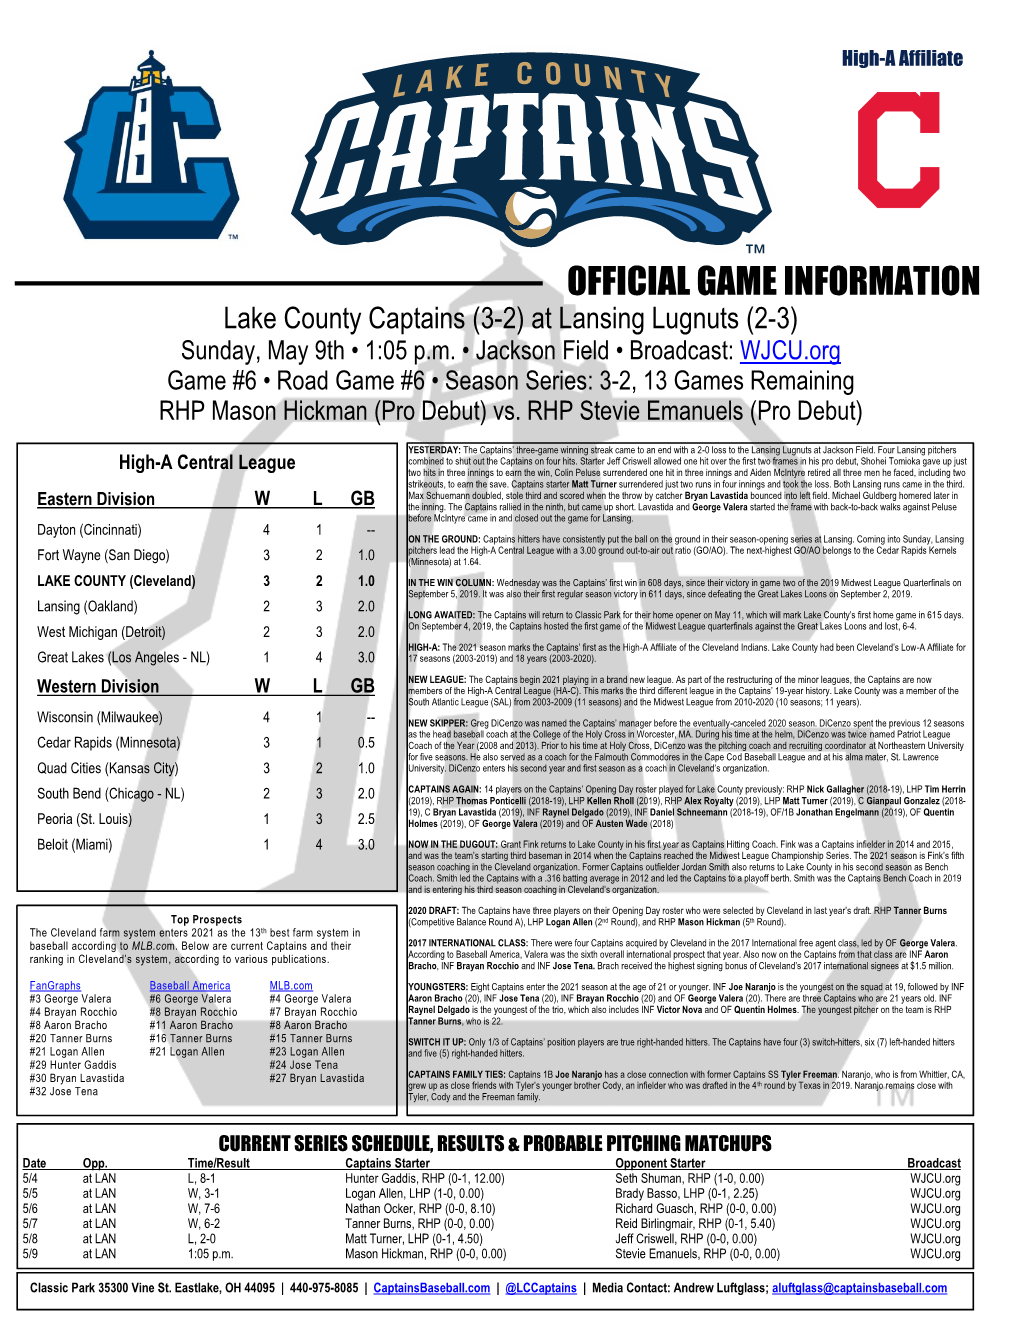 OFFICIAL GAME INFORMATION Lake County Captains (3-2) at Lansing Lugnuts (2-3) Sunday, May 9Th • 1:05 P.M